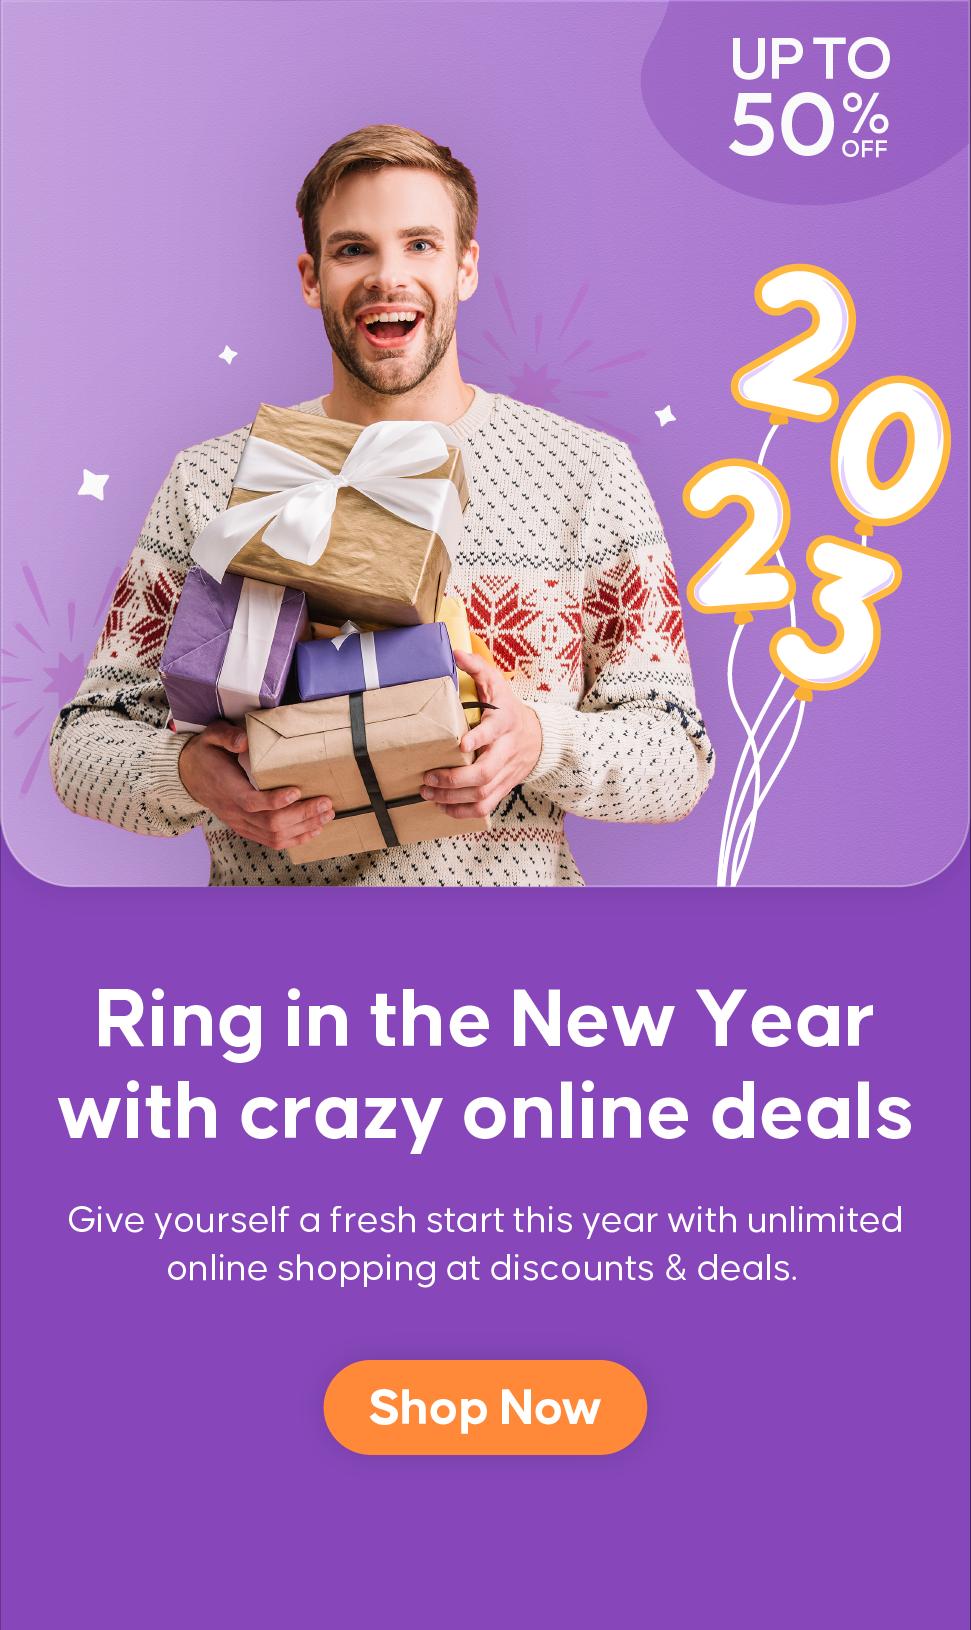 Ring the new year with crazy online deals